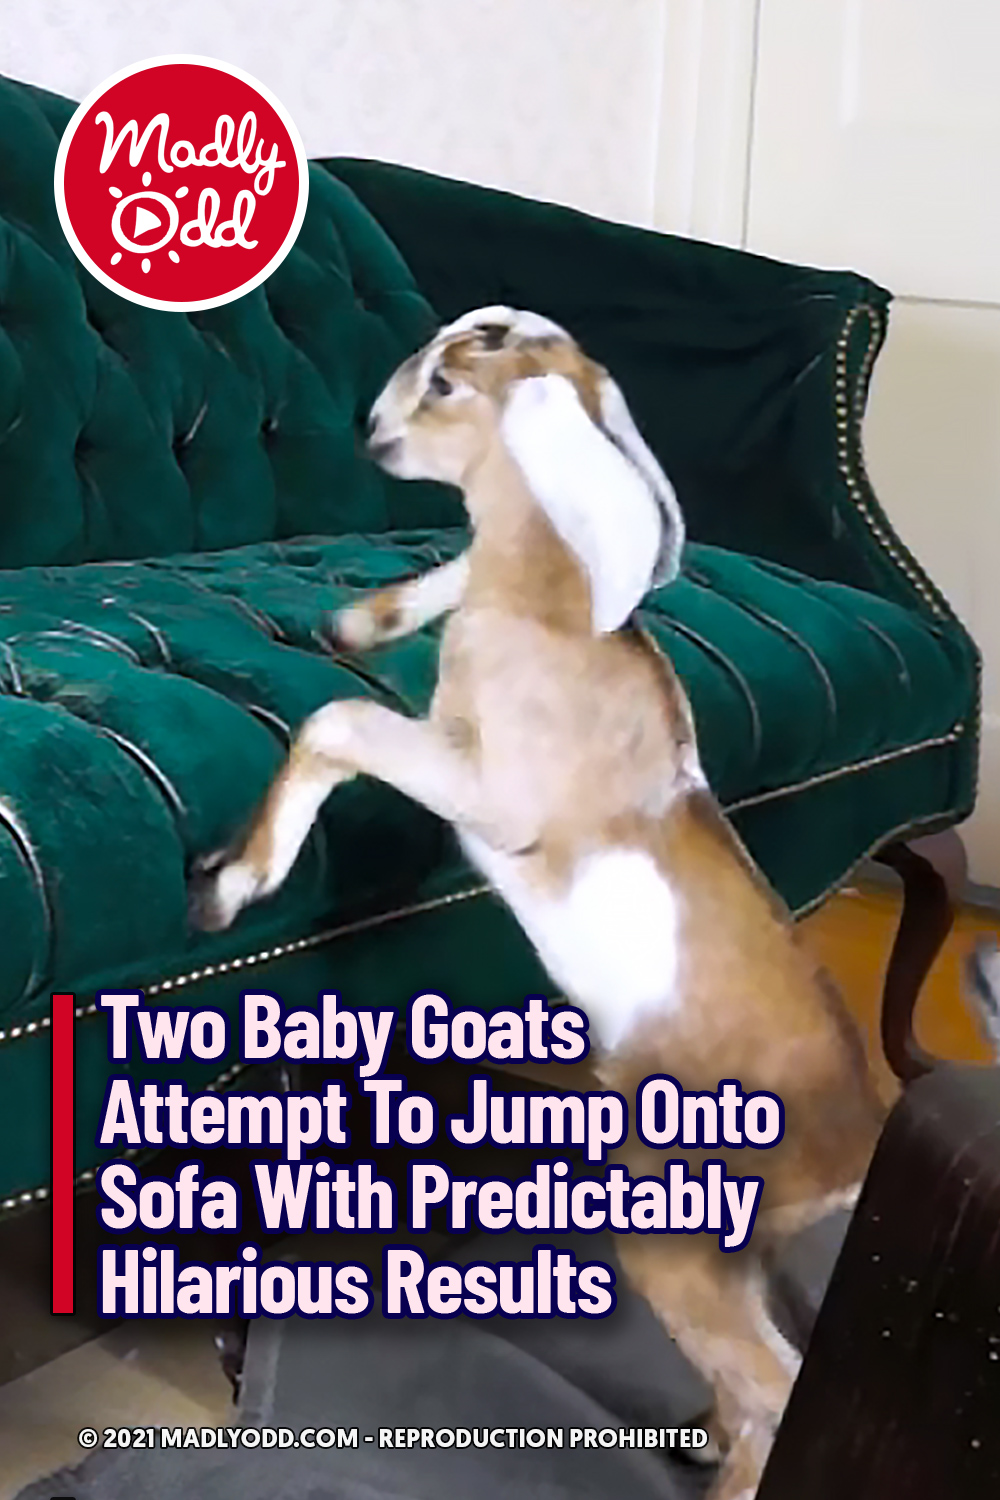 Two Baby Goats Attempt To Jump Onto Sofa With Predictably Hilarious Results